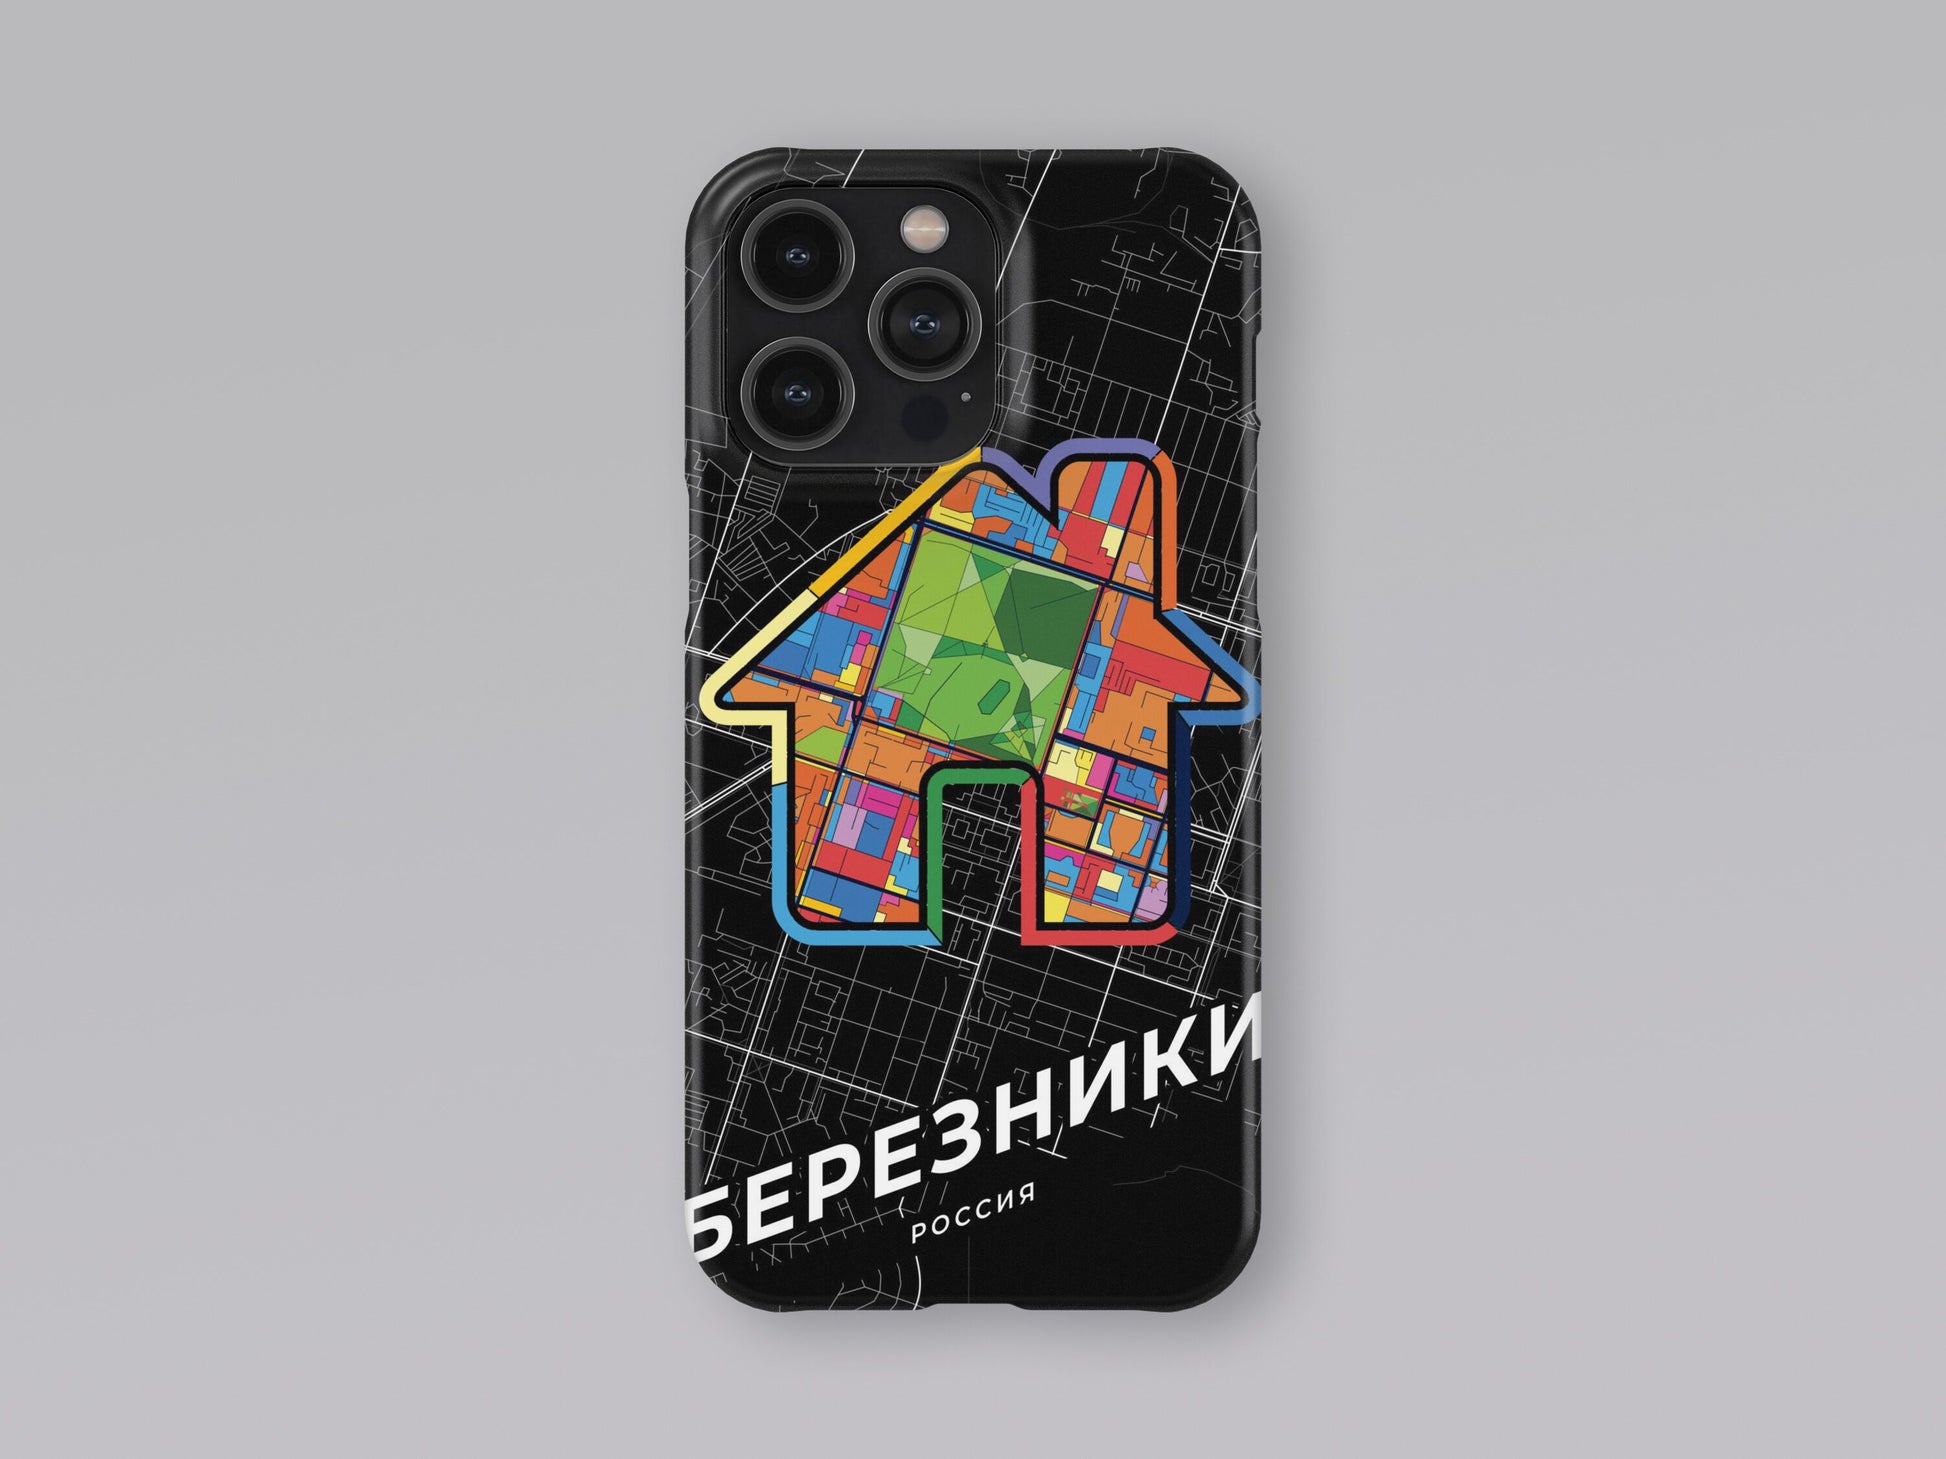 Berezniki Russia slim phone case with colorful icon. Birthday, wedding or housewarming gift. Couple match cases. 3